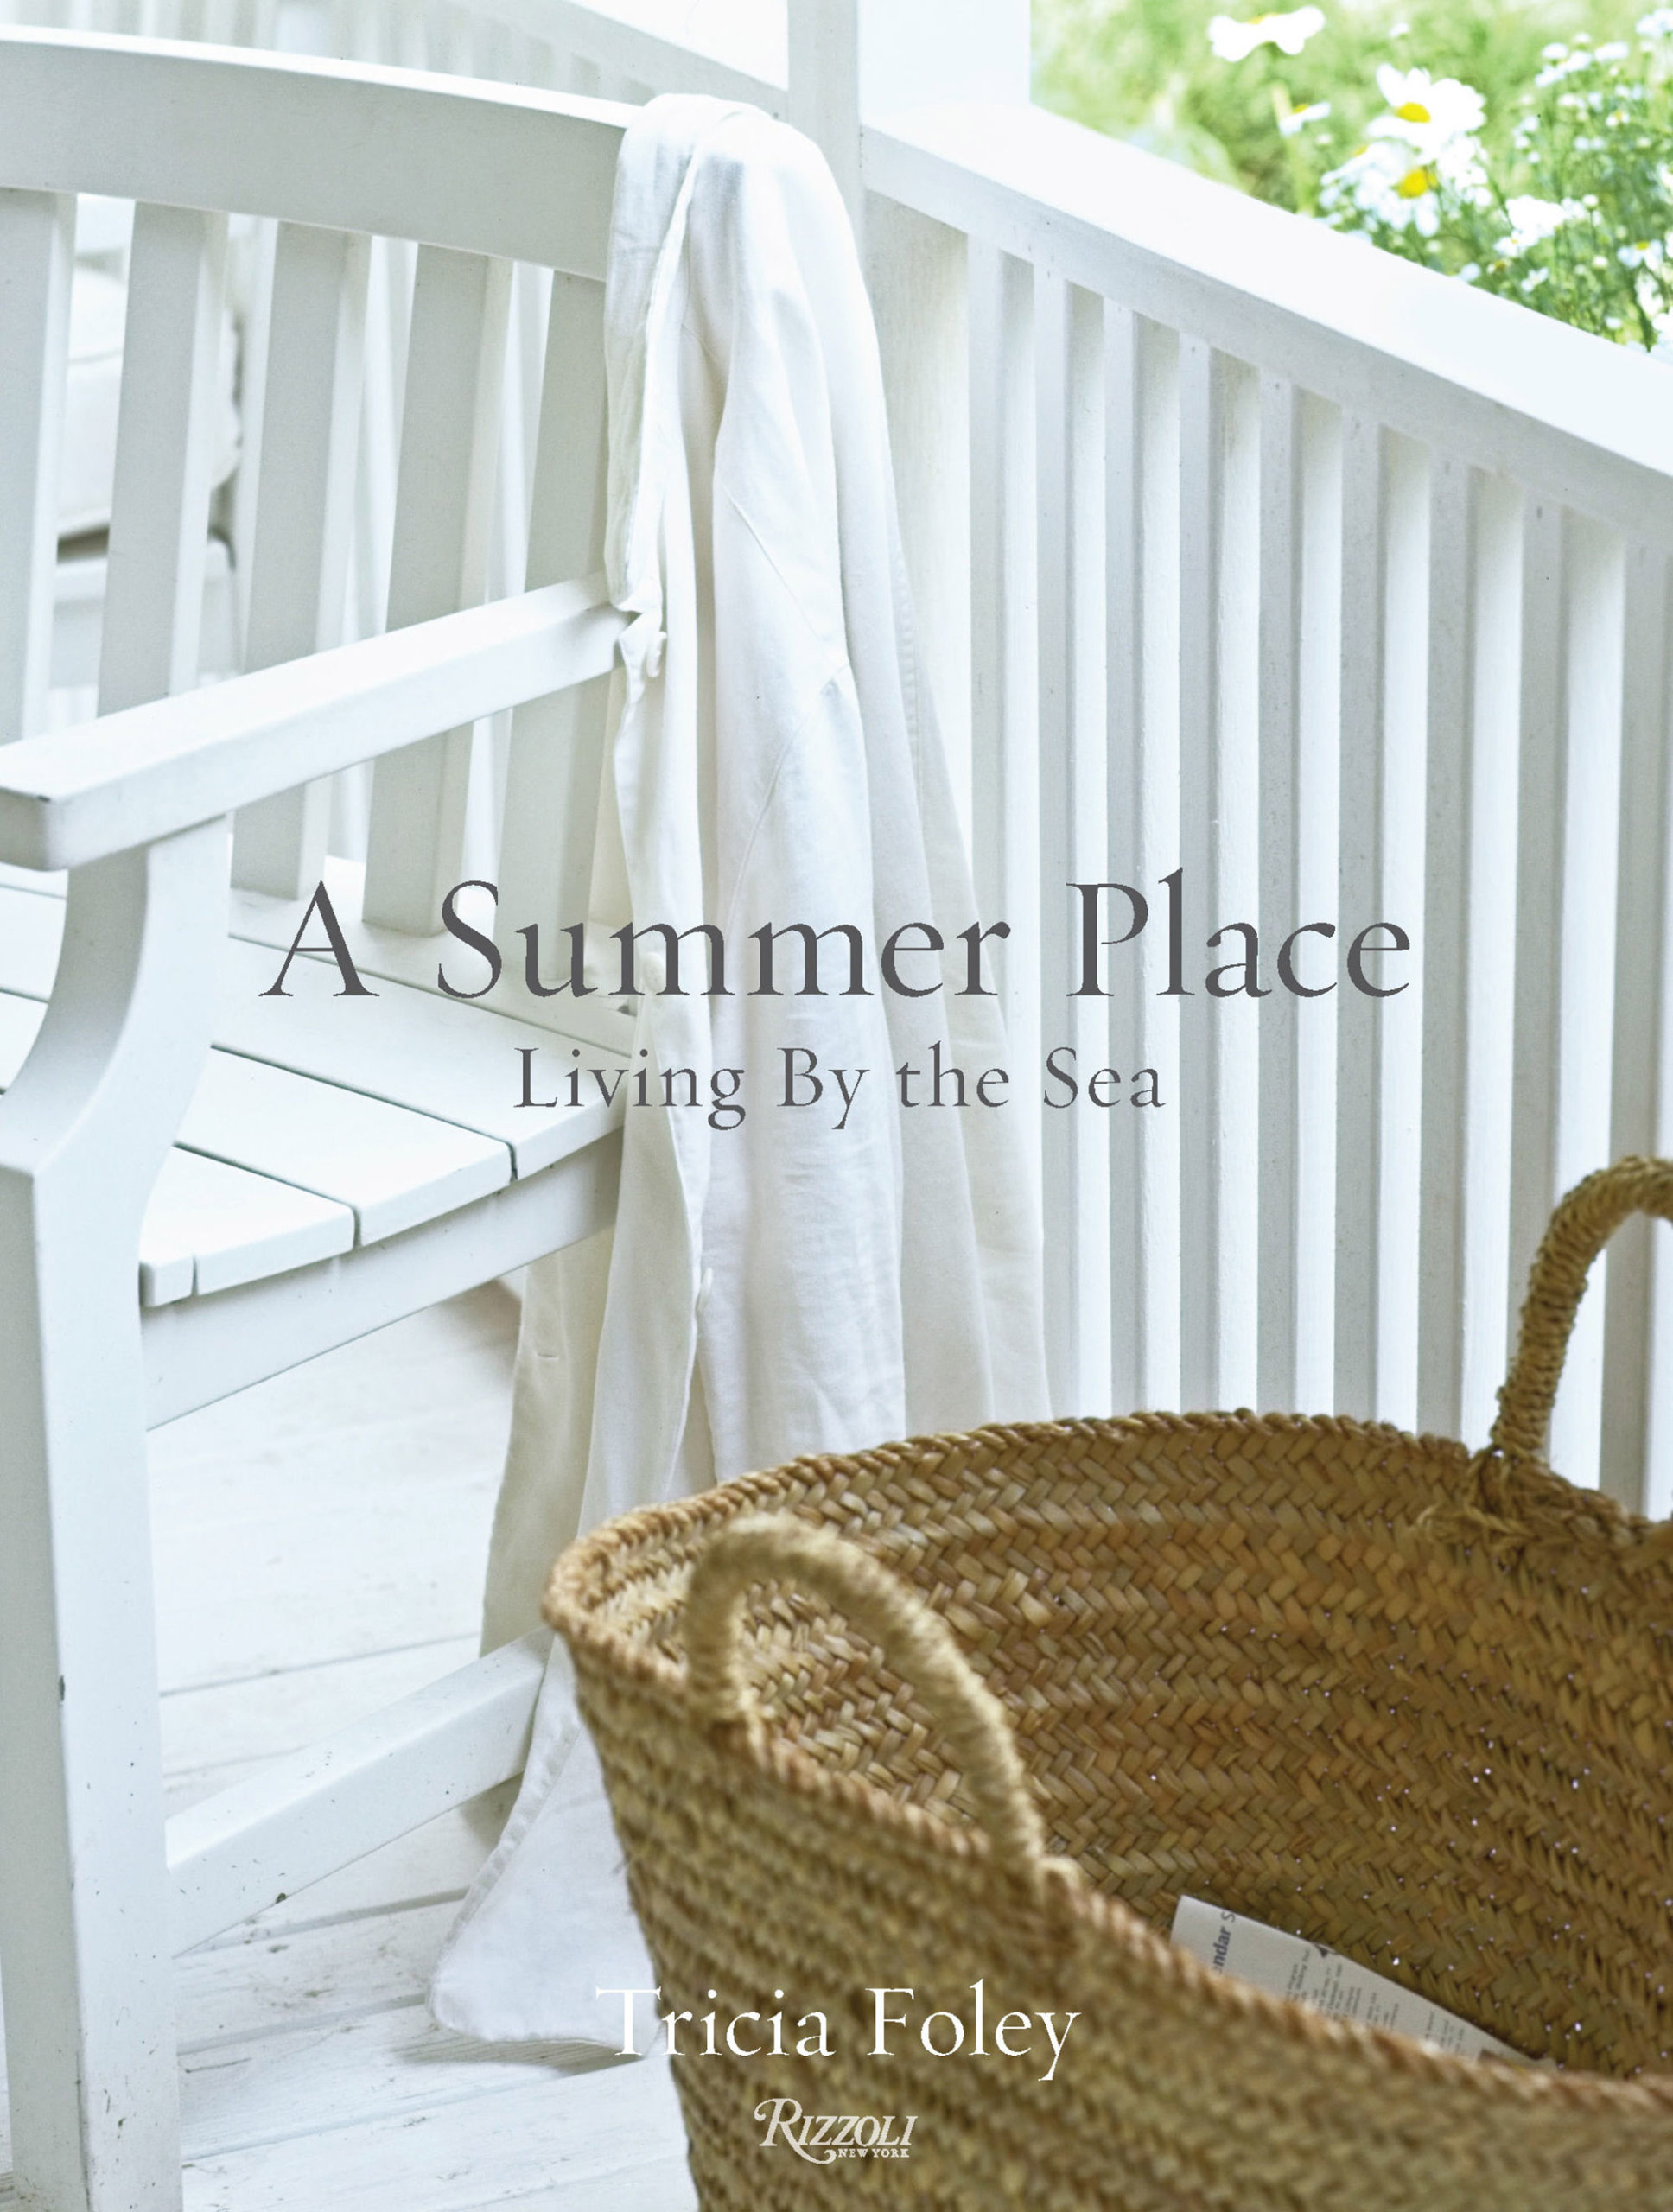 Book cover for "A Summer Place: Living by the Sea" by Tricia Foley